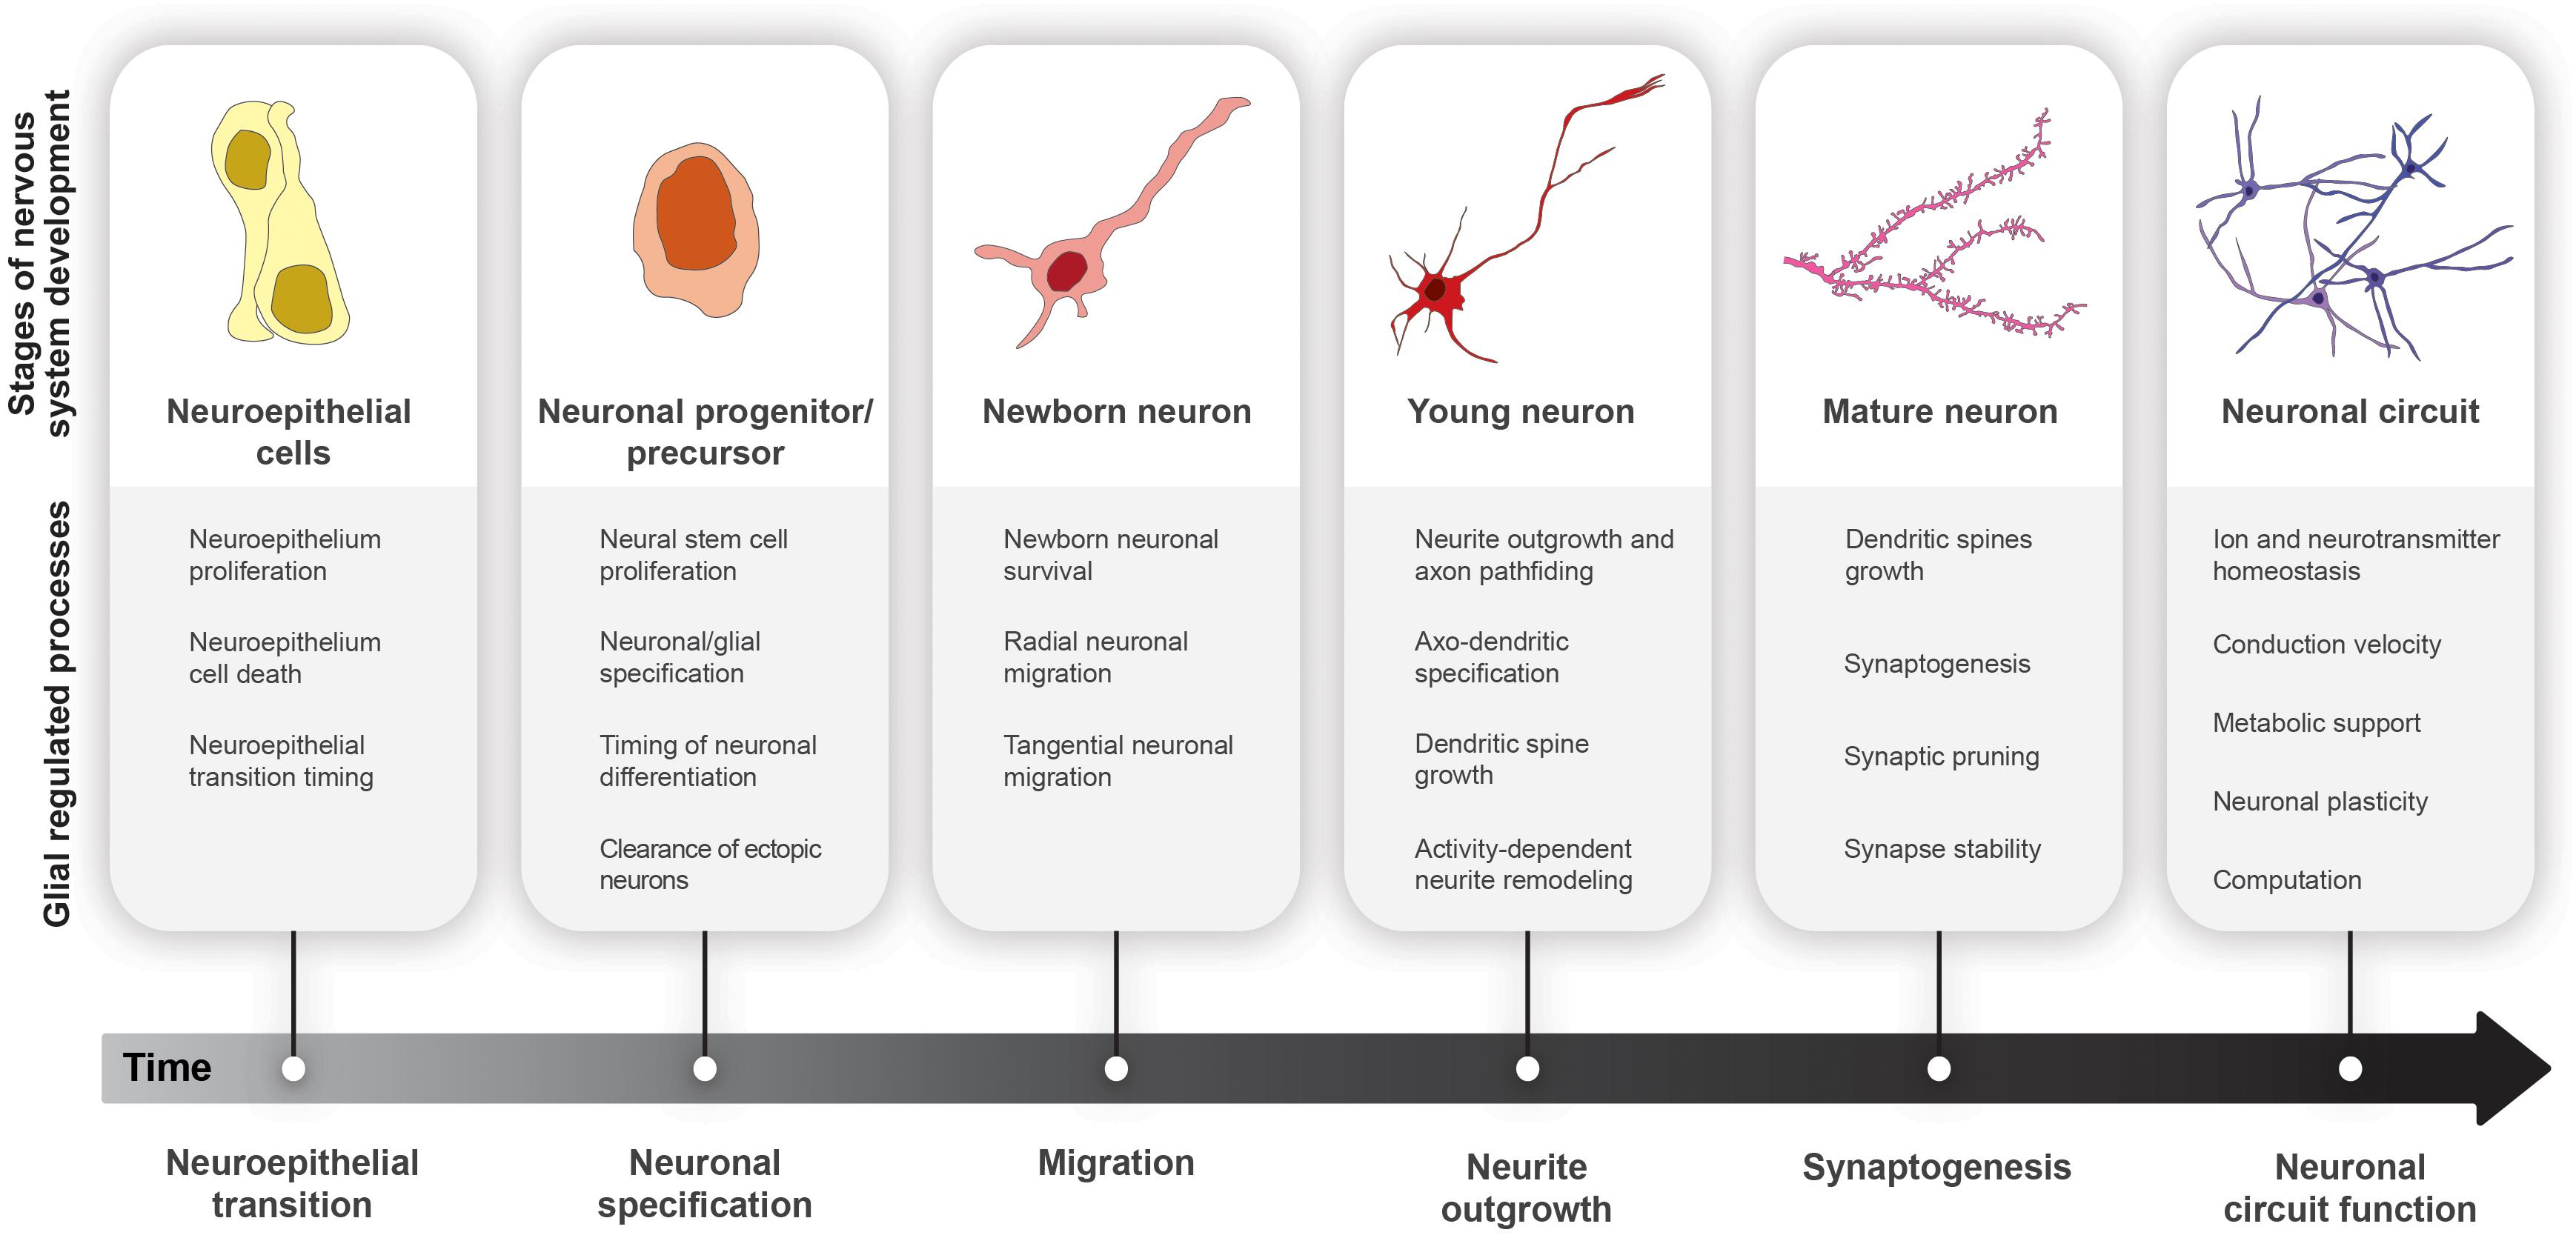 Frontiers | More Than Mortar: Glia as Architects of Nervous System